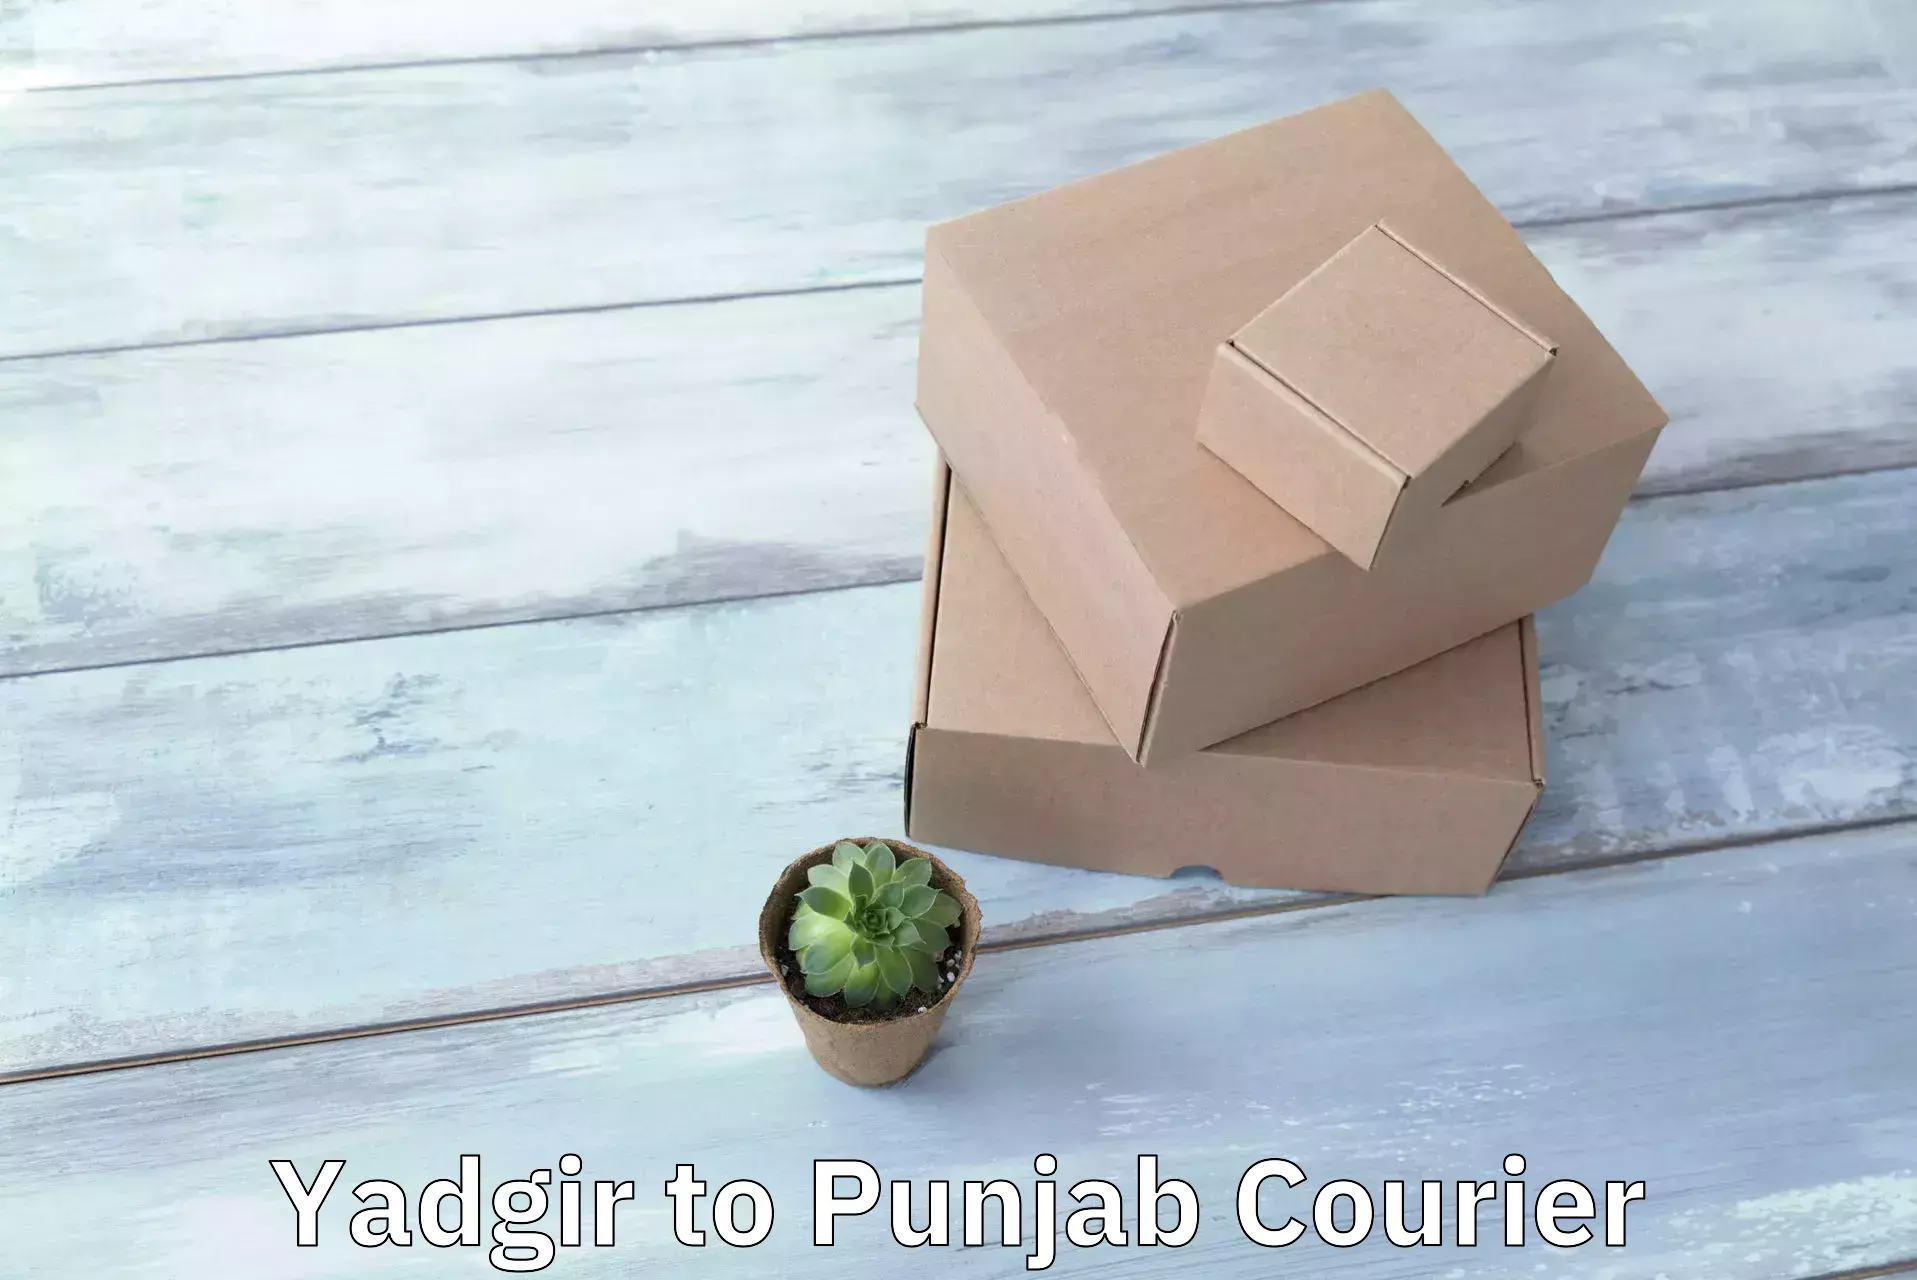 User-friendly delivery service Yadgir to Punjab